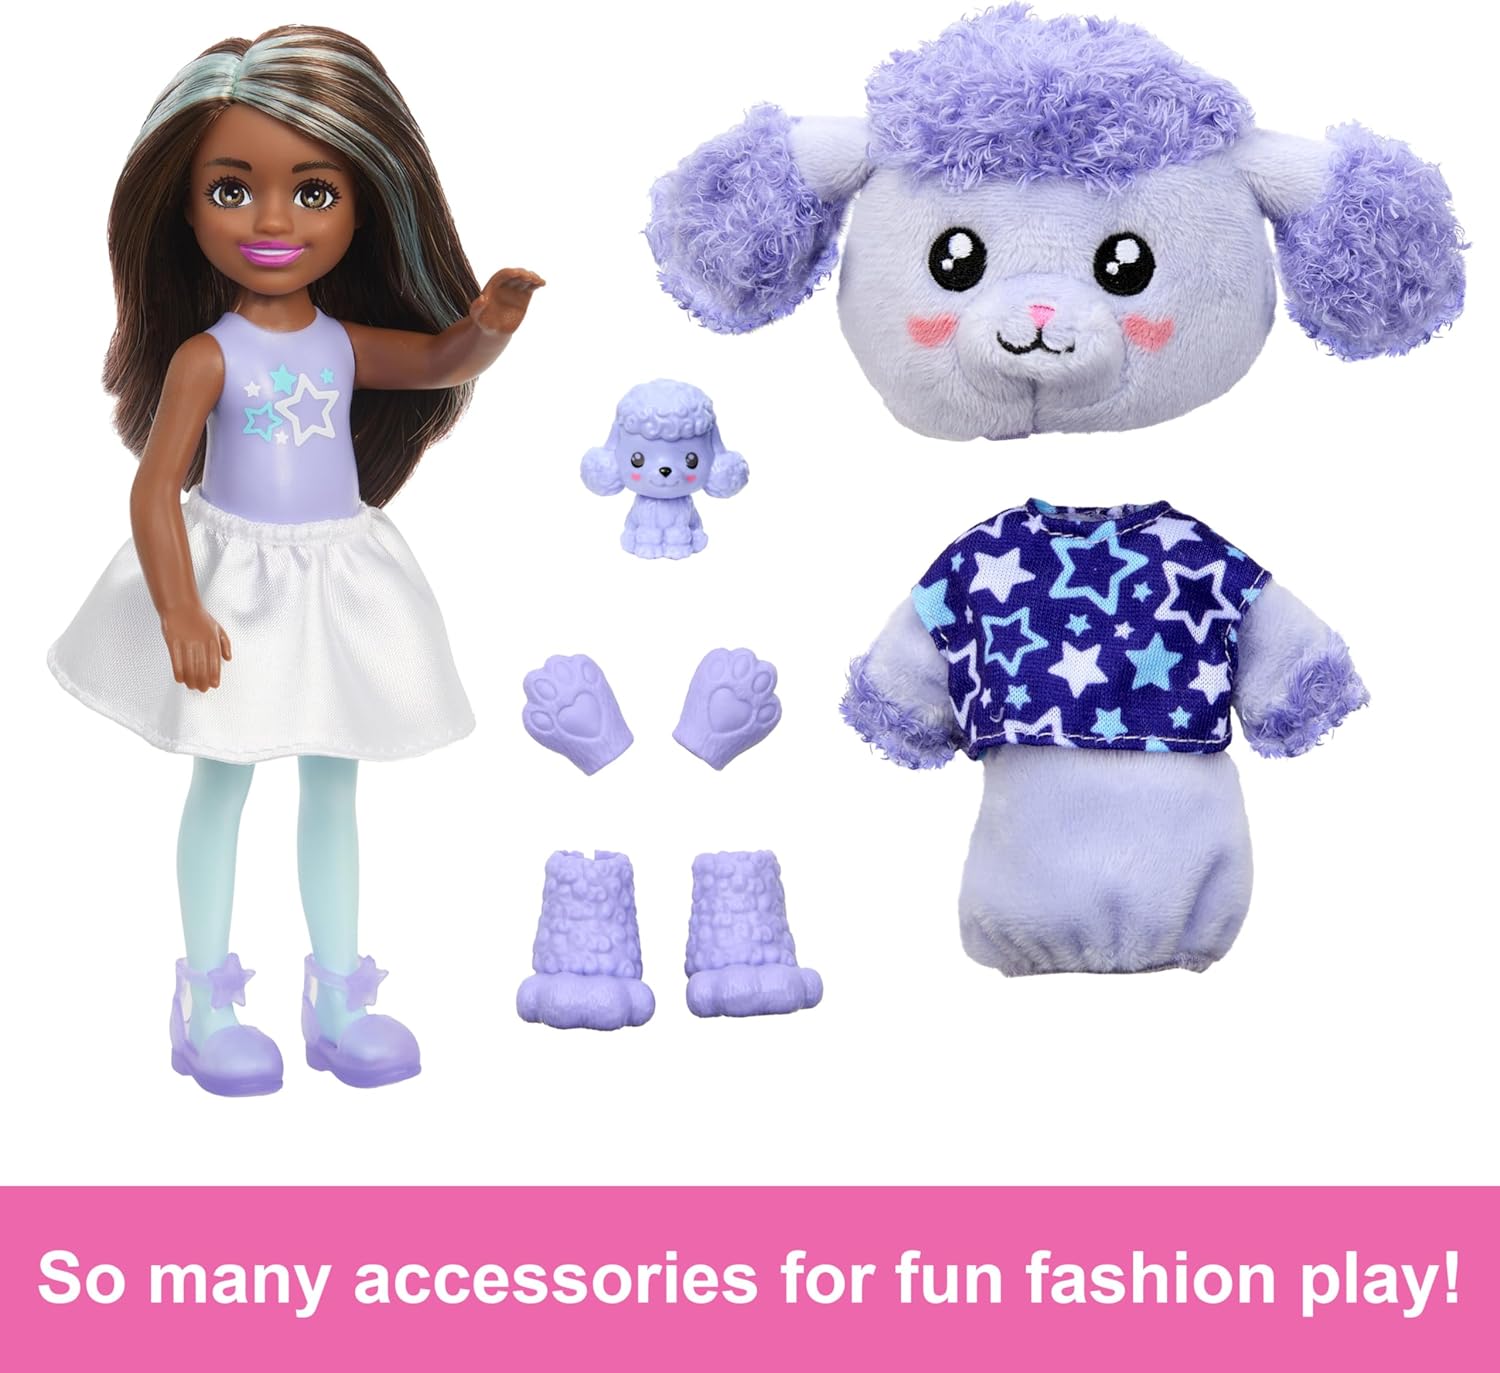 Barbie Chelsea Cutie Reveal Small Doll & Accessories, Brunette in Poodle Costume, 6 Surprises, Color Change (Styles May Vary)